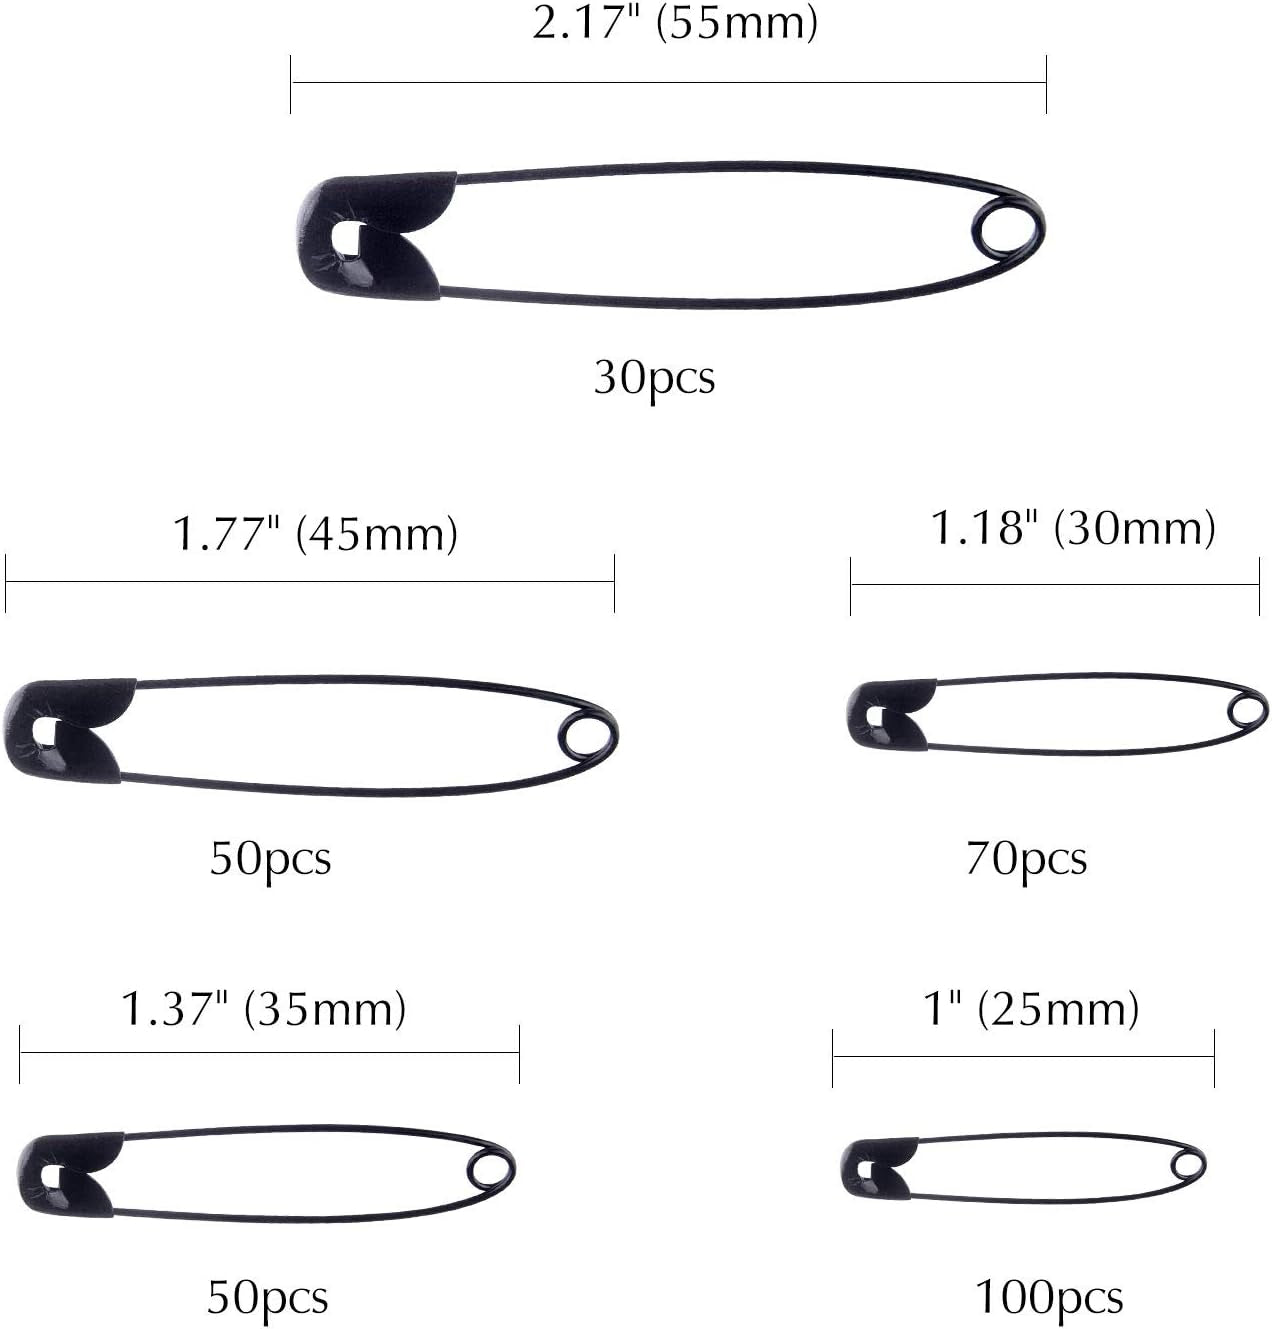 5 Sizes Black Safety Pins Assorted 25-55Mm – SpringLime